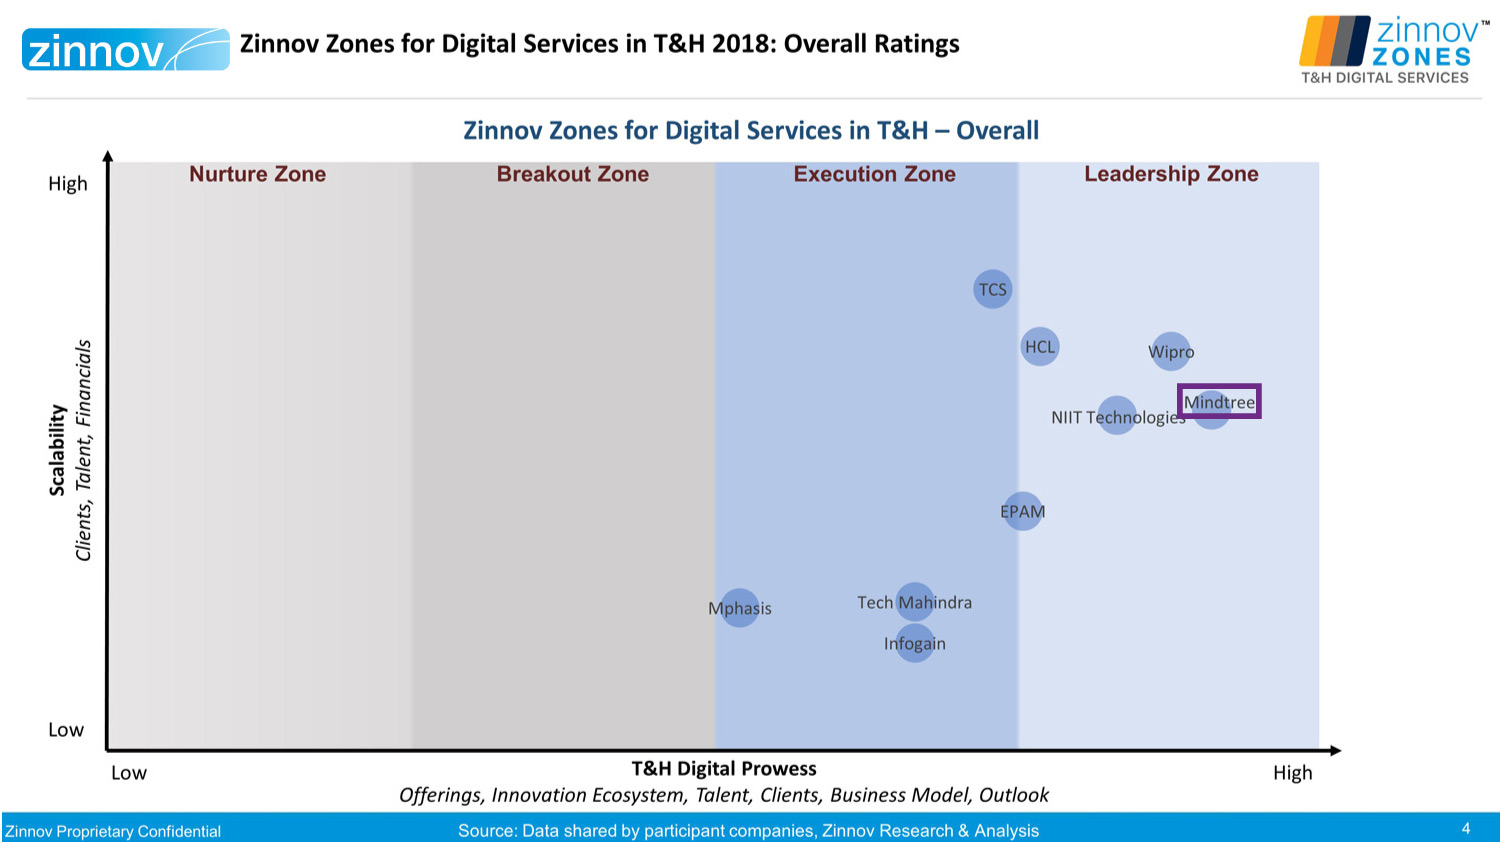 Zinnov positions Mindtree as a Leader in Digital Services for Travel and Hospitality